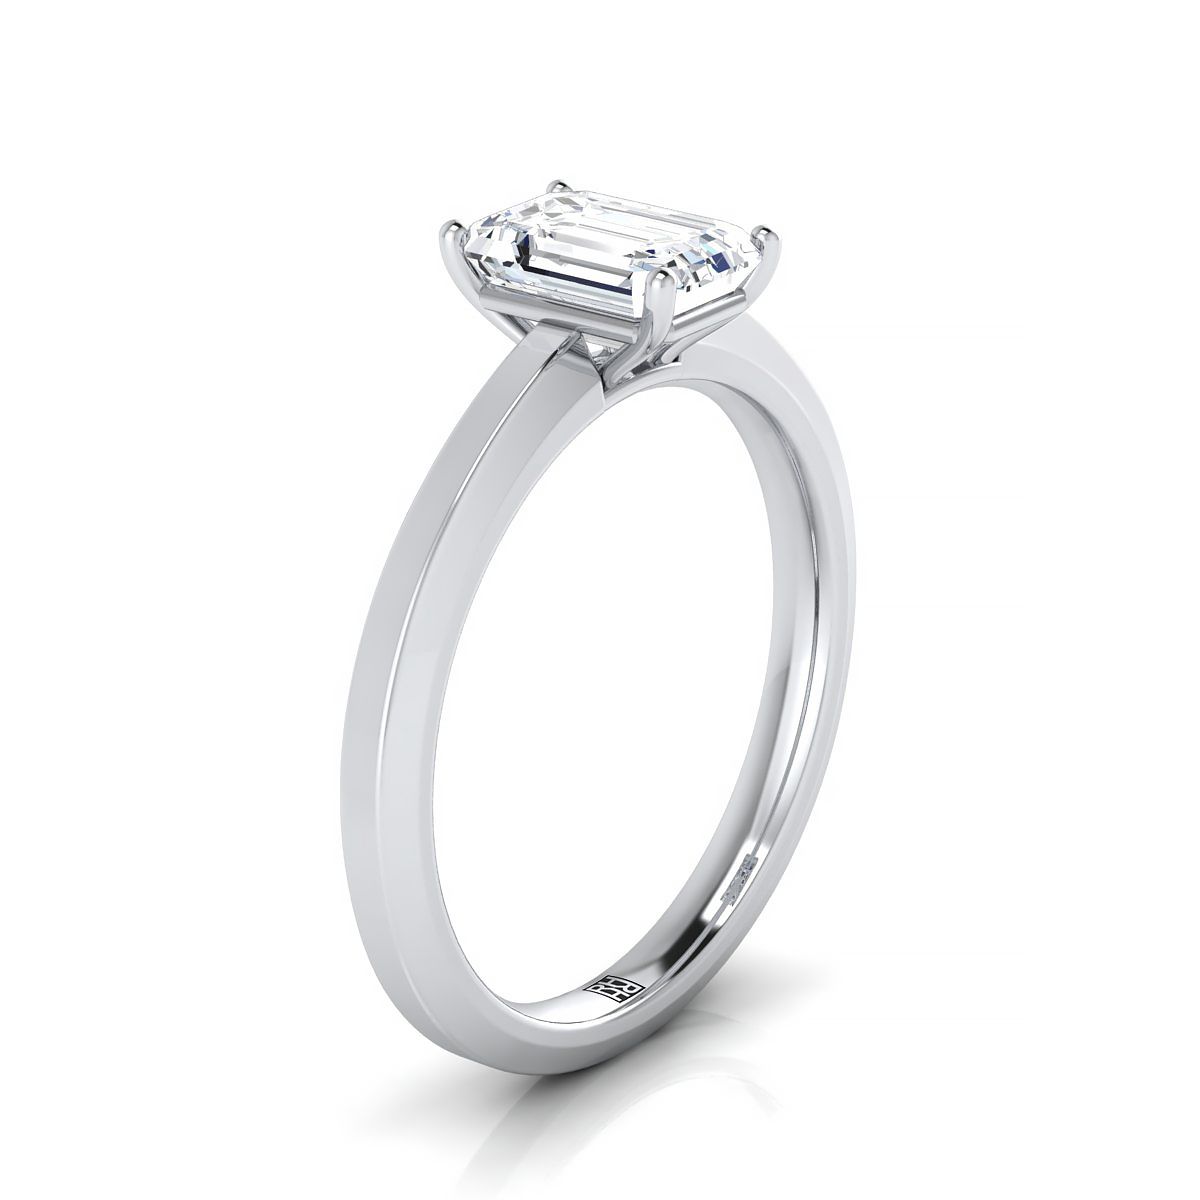 14K White Gold Emerald Cut  Beveled Edge Comfort Style Bright Finish Solitaire Engagement Ring